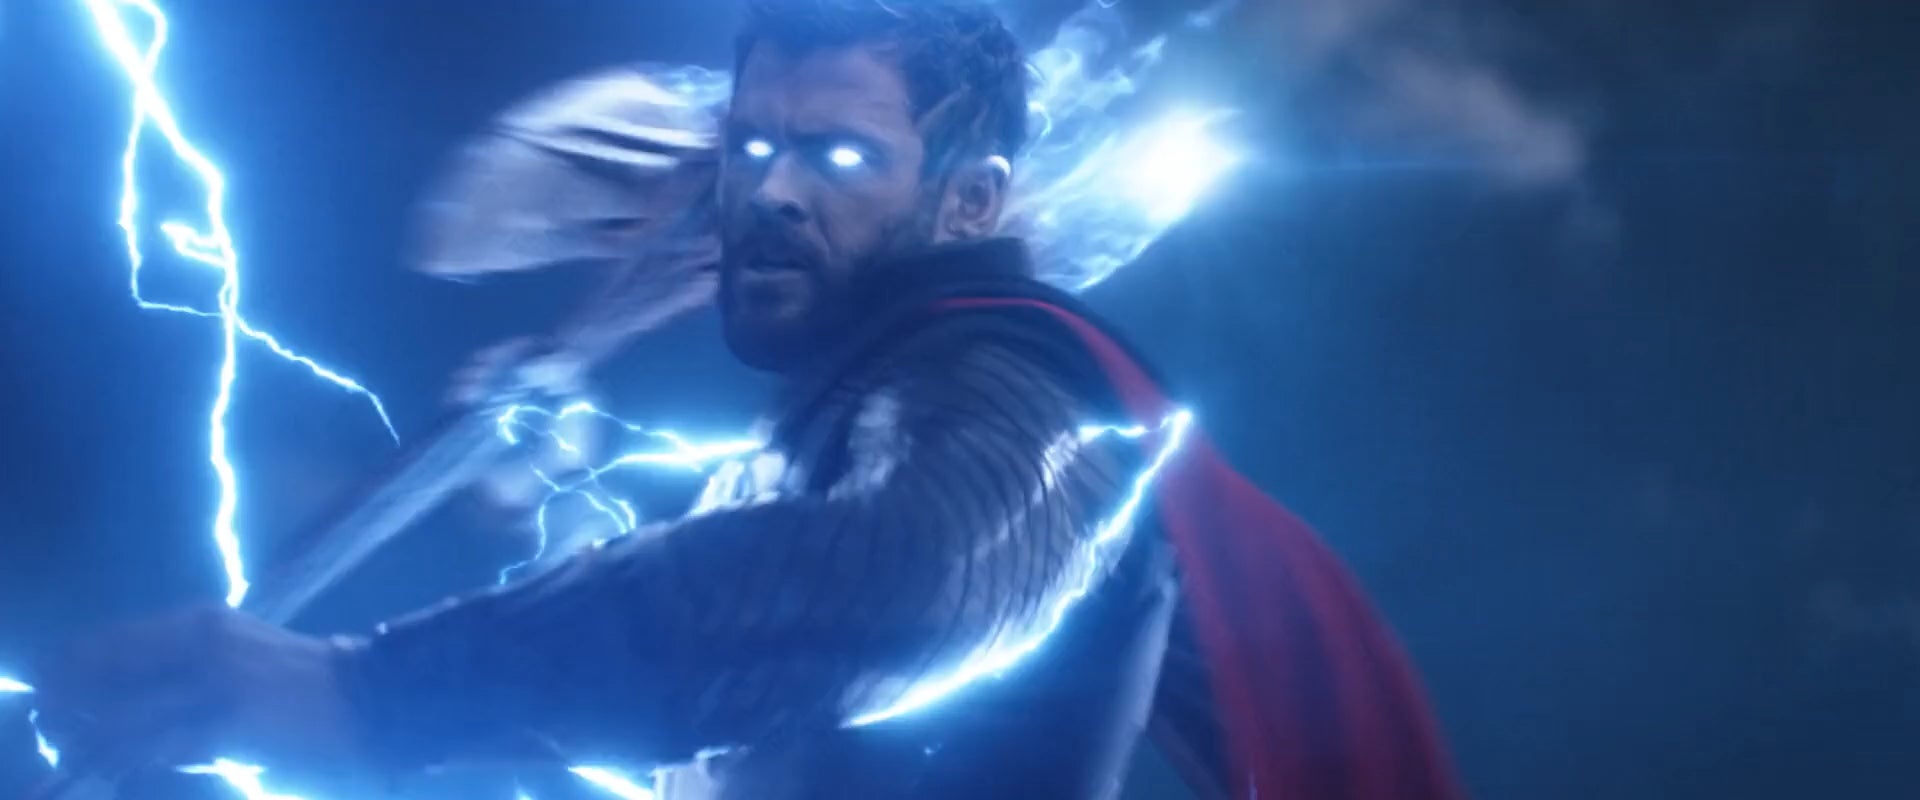 I edited Thor's entrance with the Immigrant Song. Tried my best so the Avenger's theme doesn't overlap, and for the music to be in sync with the action.: marvelstudios